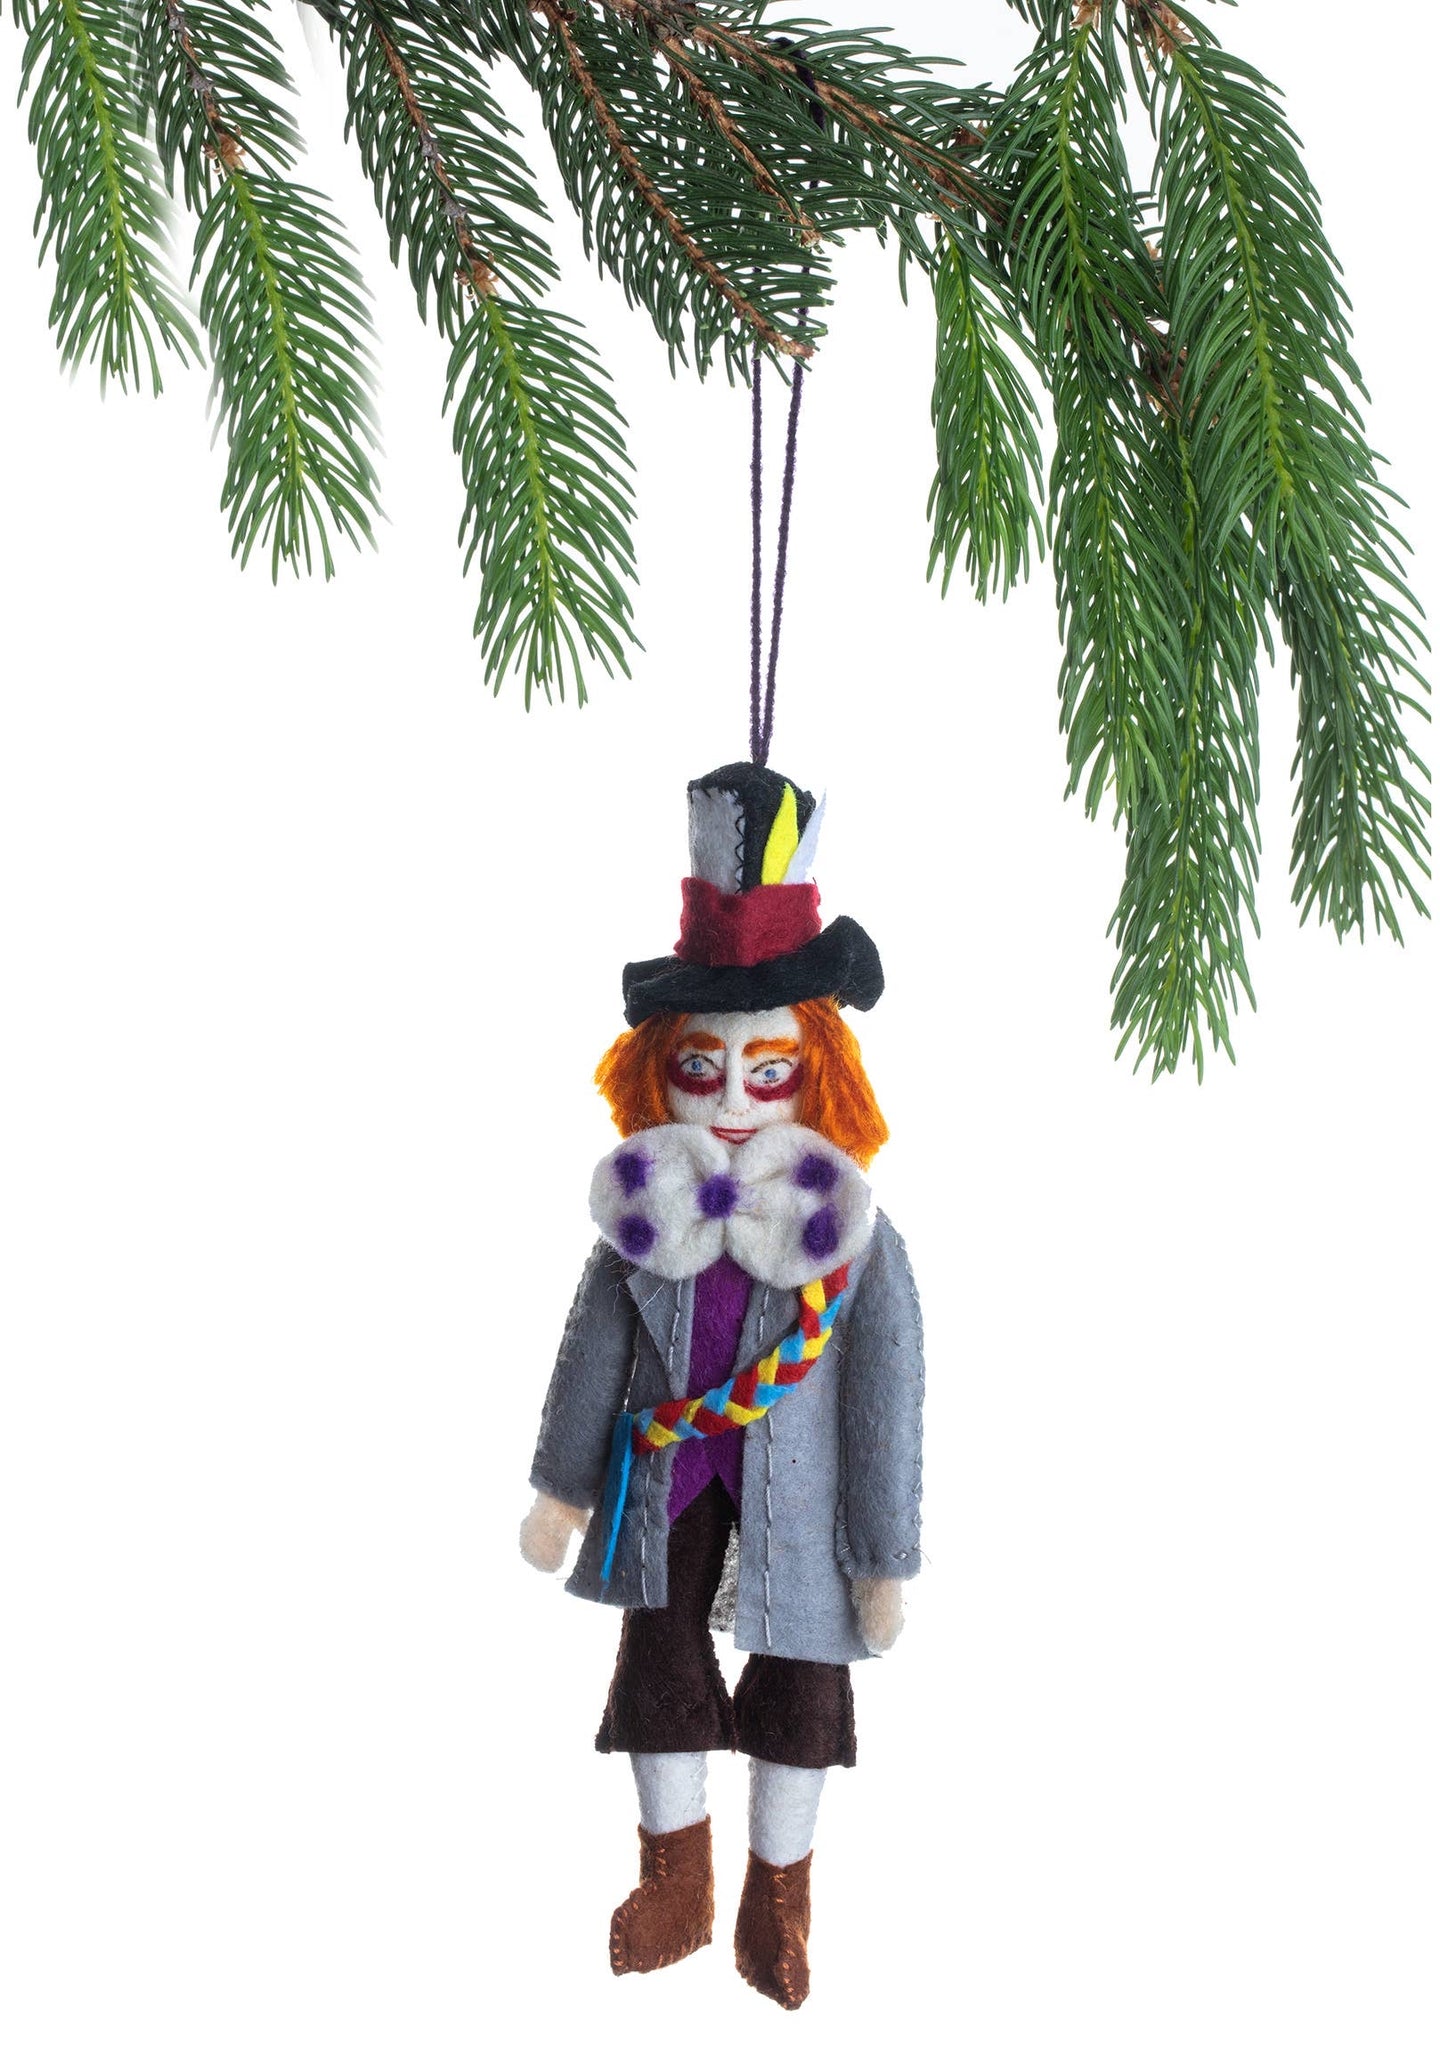 Mad Hatter - Alice in Wonderland Character Ornament